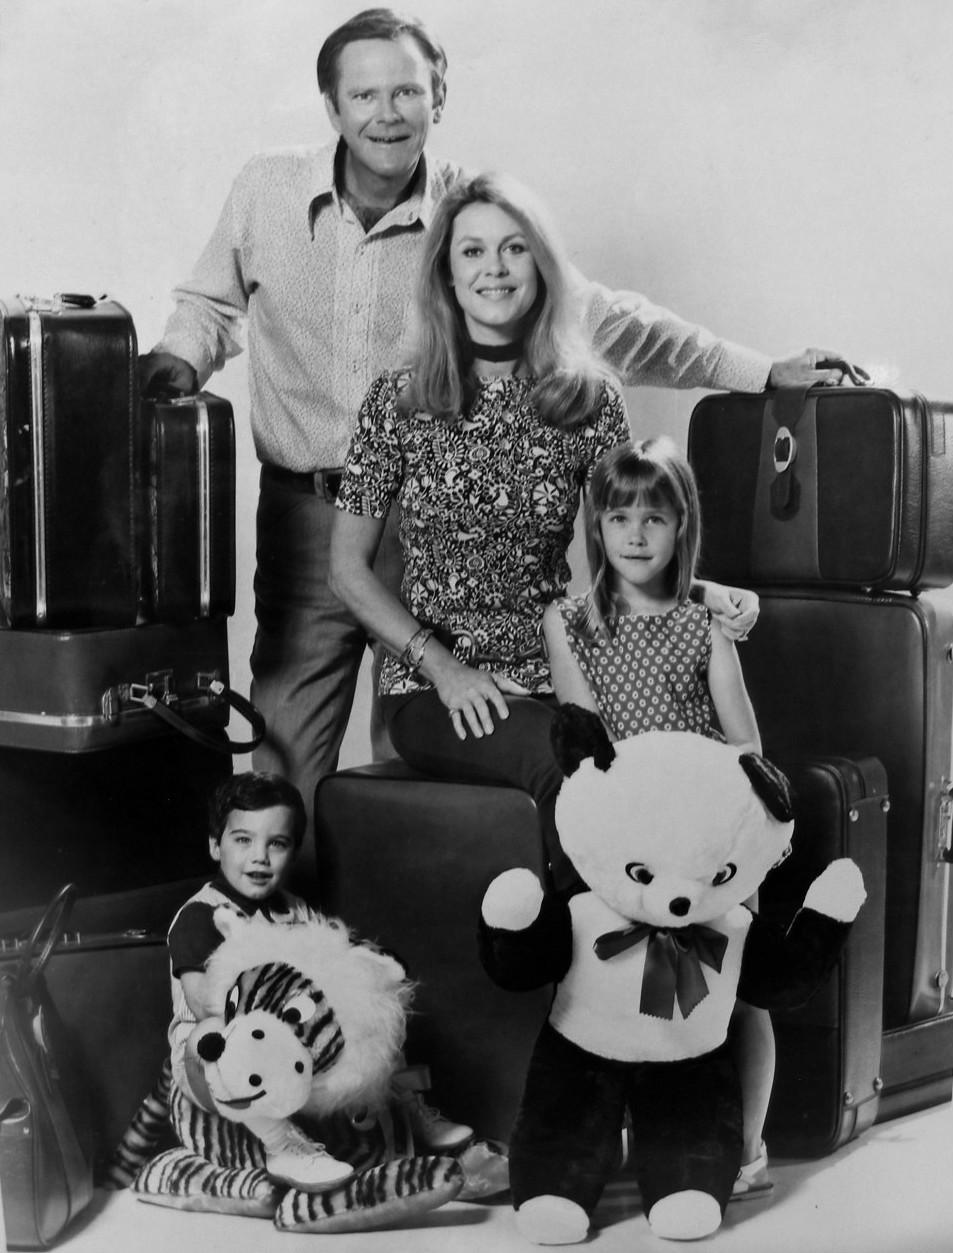 Cast photo of the Stephens family from the television program Bewitched. | Photo: Wikimedia Commons Images